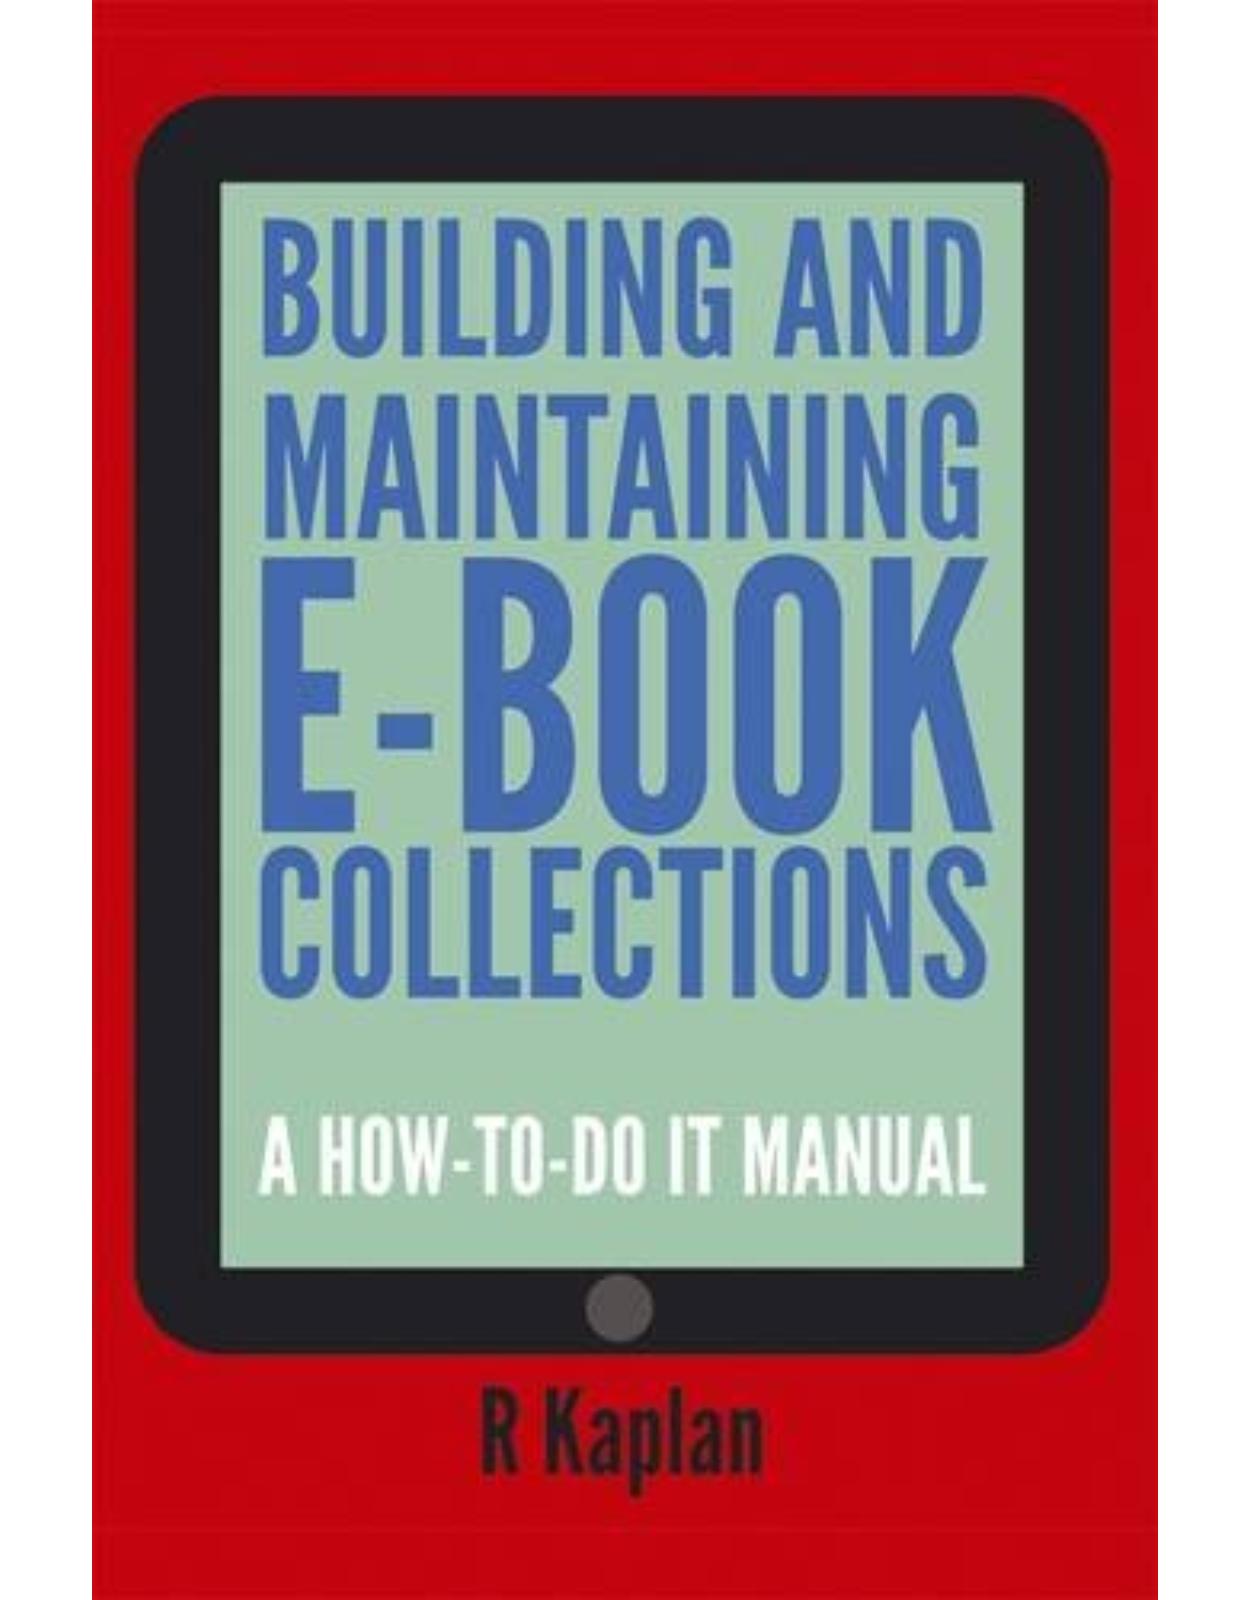 Building and Managing E-book Collections: A How-to-do-it Manual for Librarians